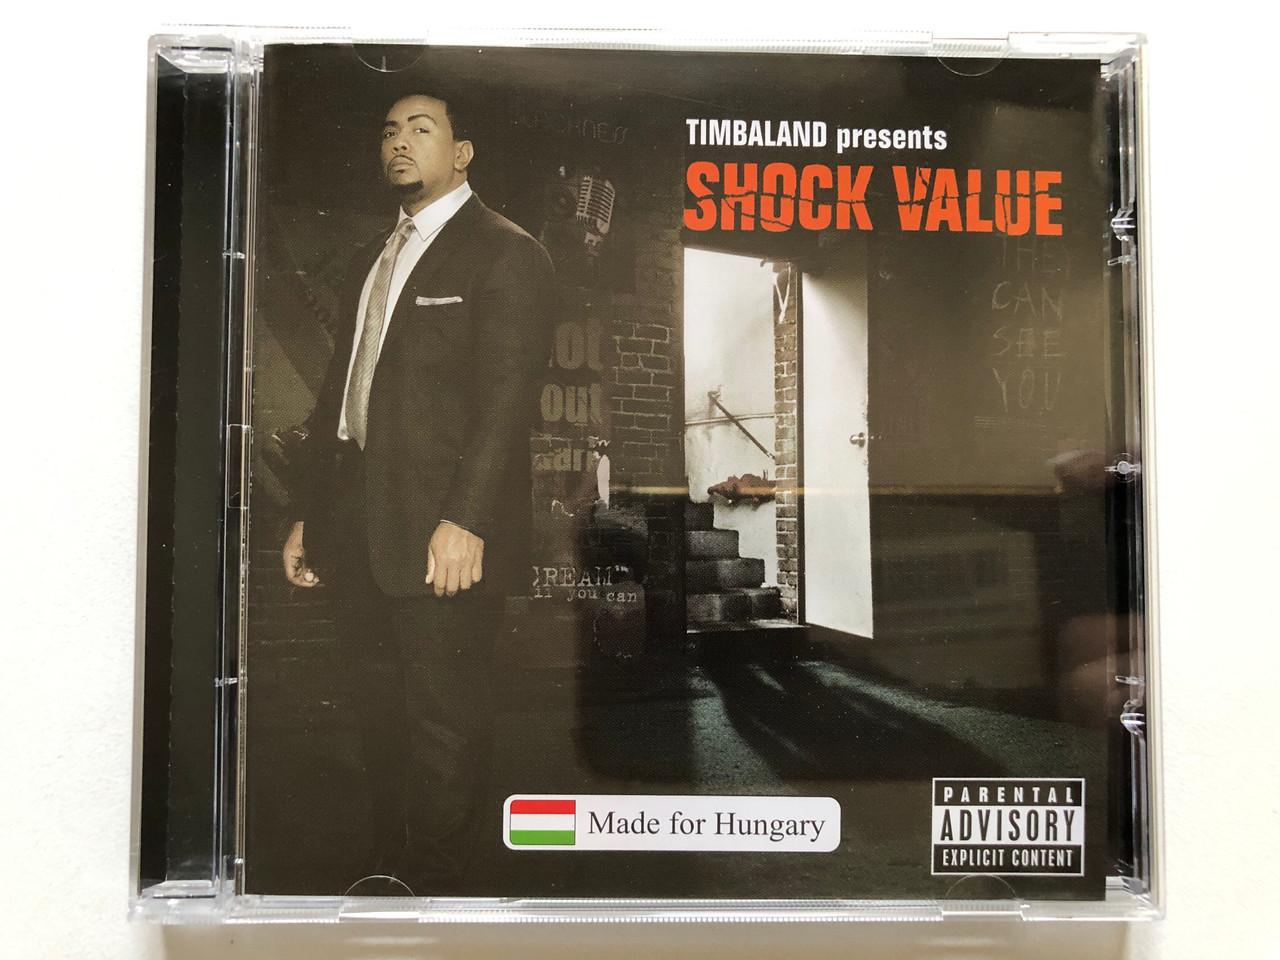 https://cdn10.bigcommerce.com/s-62bdpkt7pb/products/0/images/313291/Timbaland_Presents_Shock_Value_Made_for_Hungary_Blackground_Records_Audio_CD_2007_0602517334403_1__99012.1700664130.1280.1280.JPG?c=2